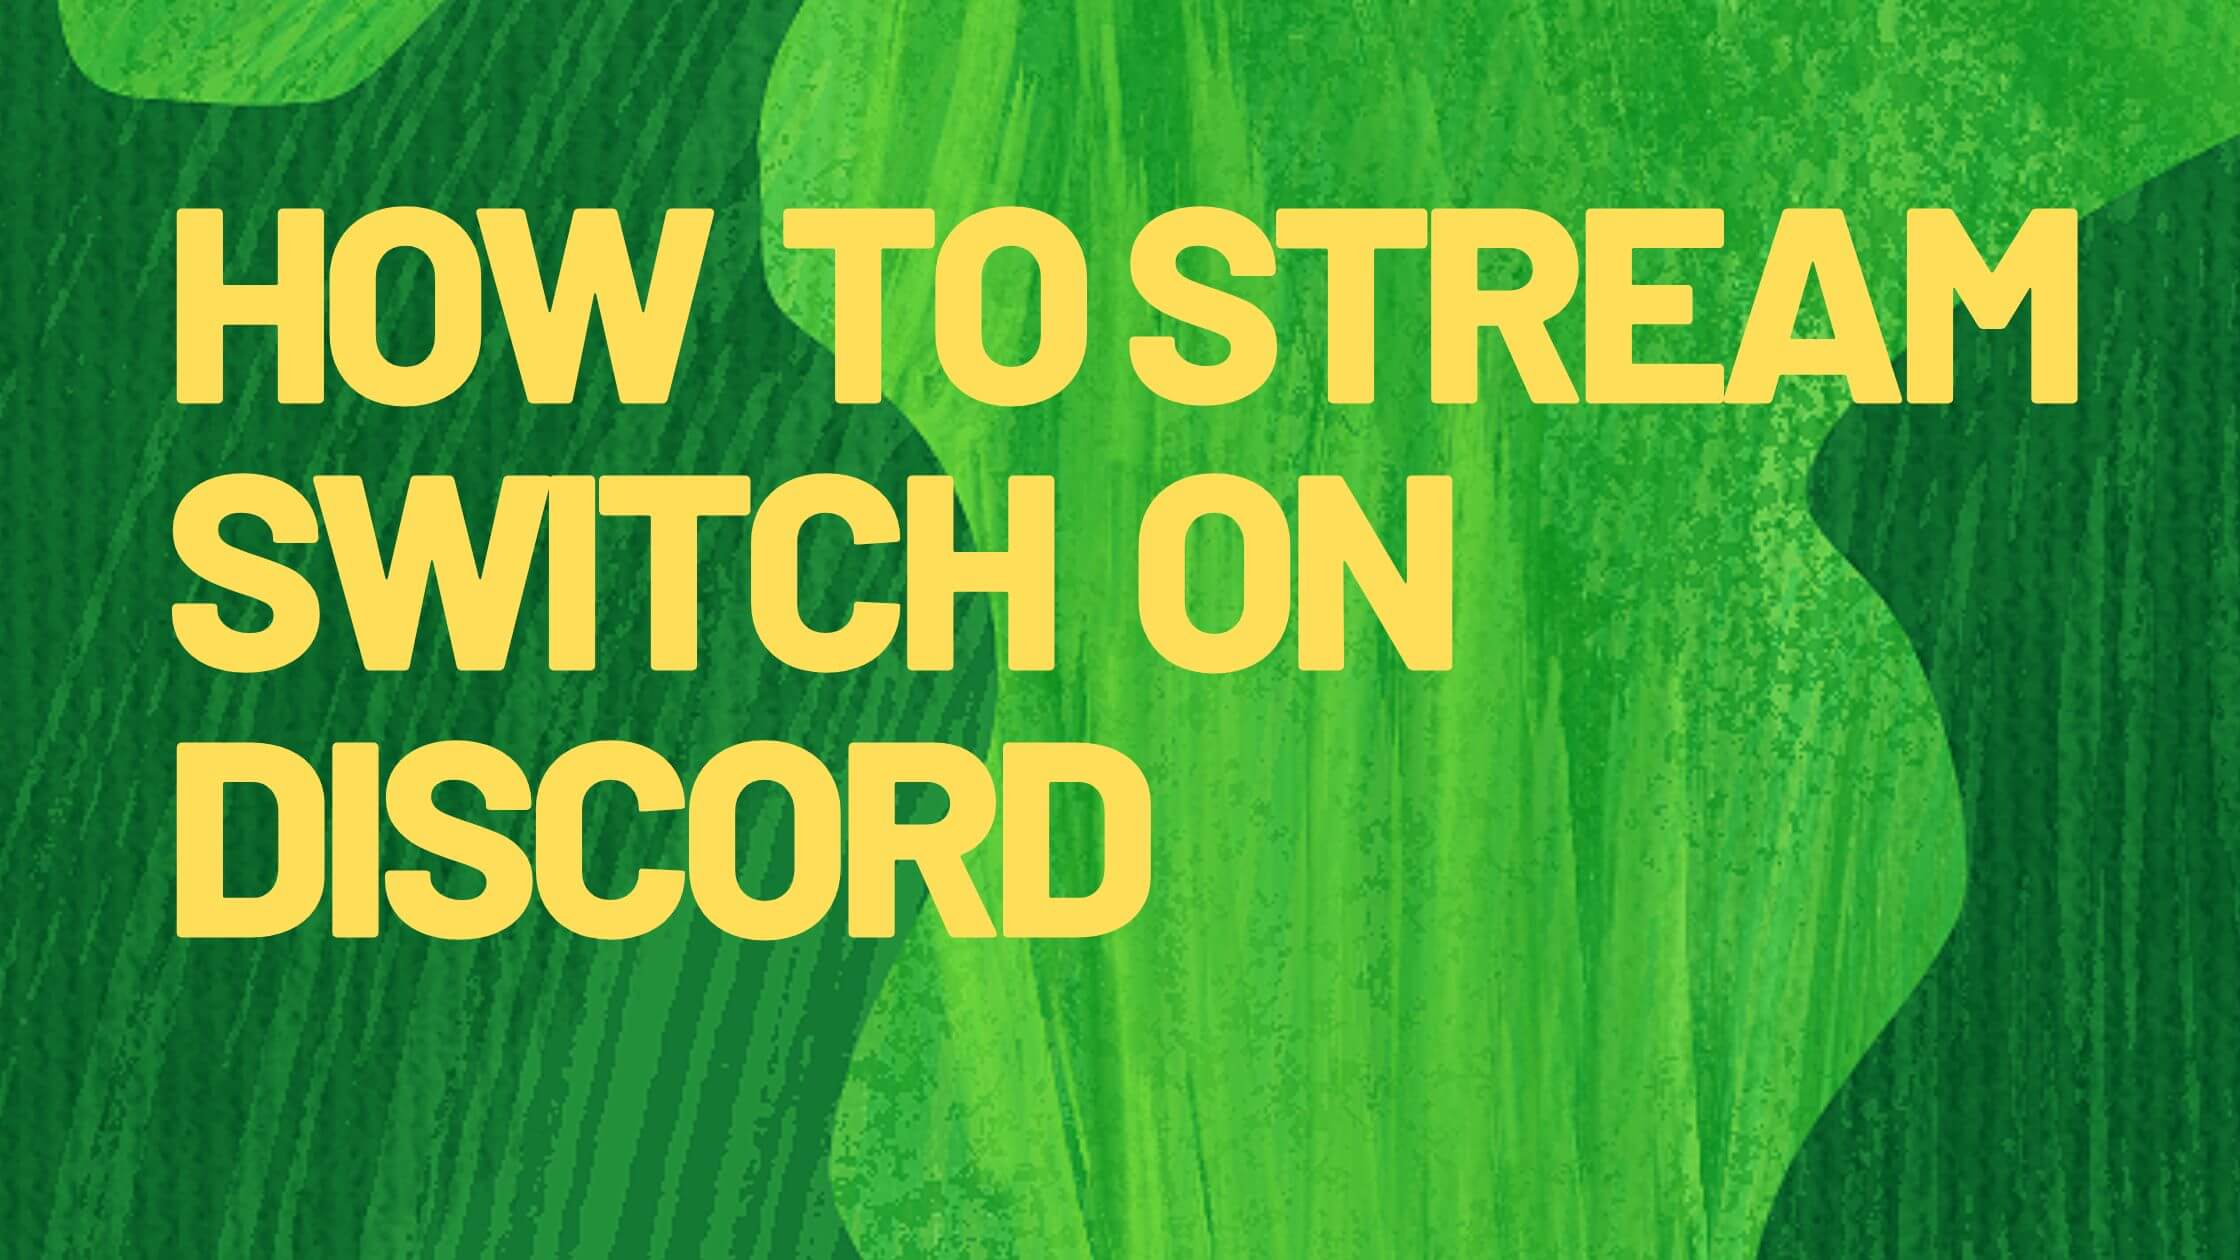 How to stream switch on Discord